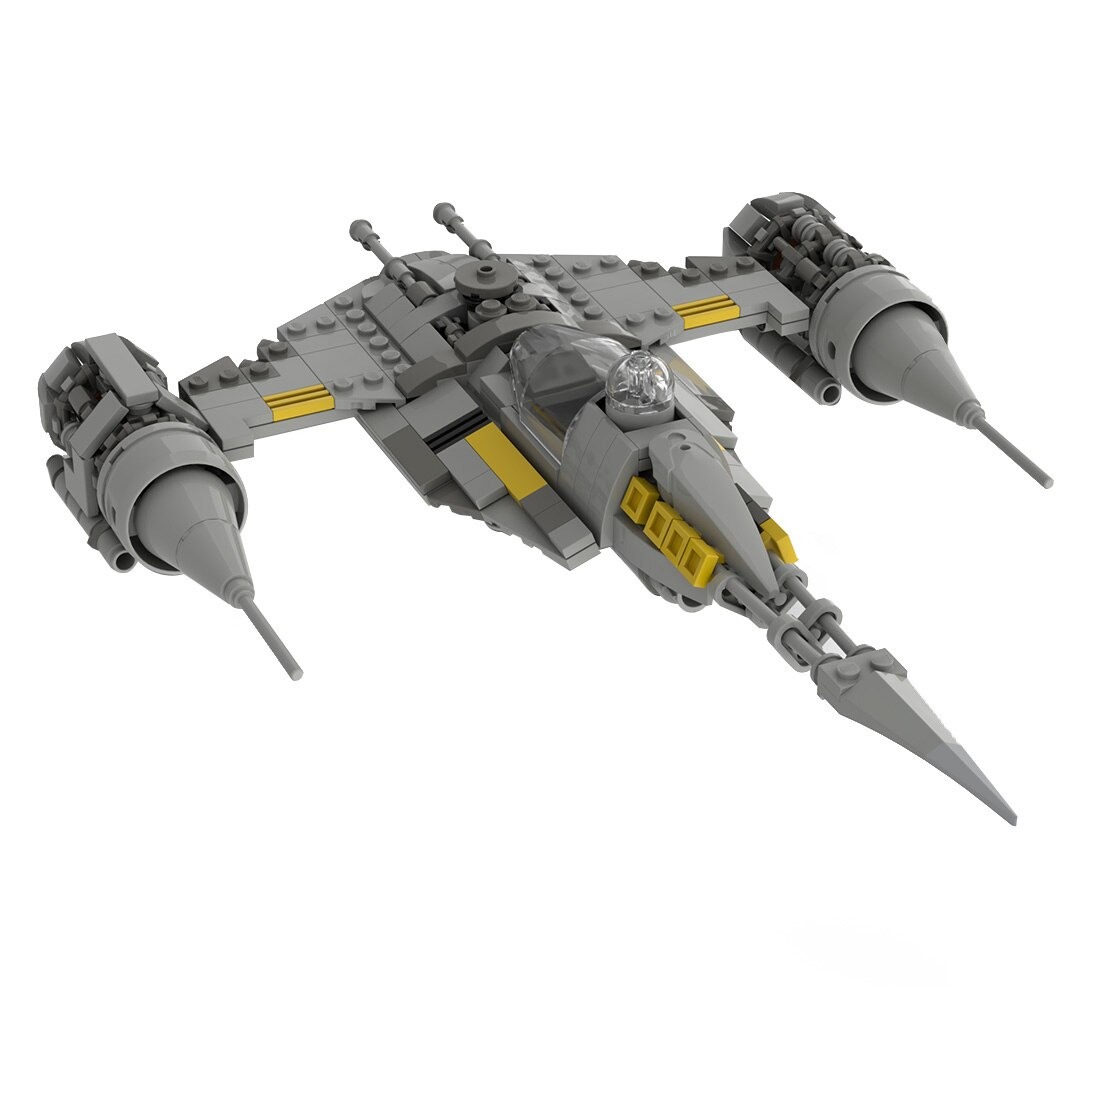 authorized moc 100546 n 1 starfighter bui main 2 1 - MOULD KING